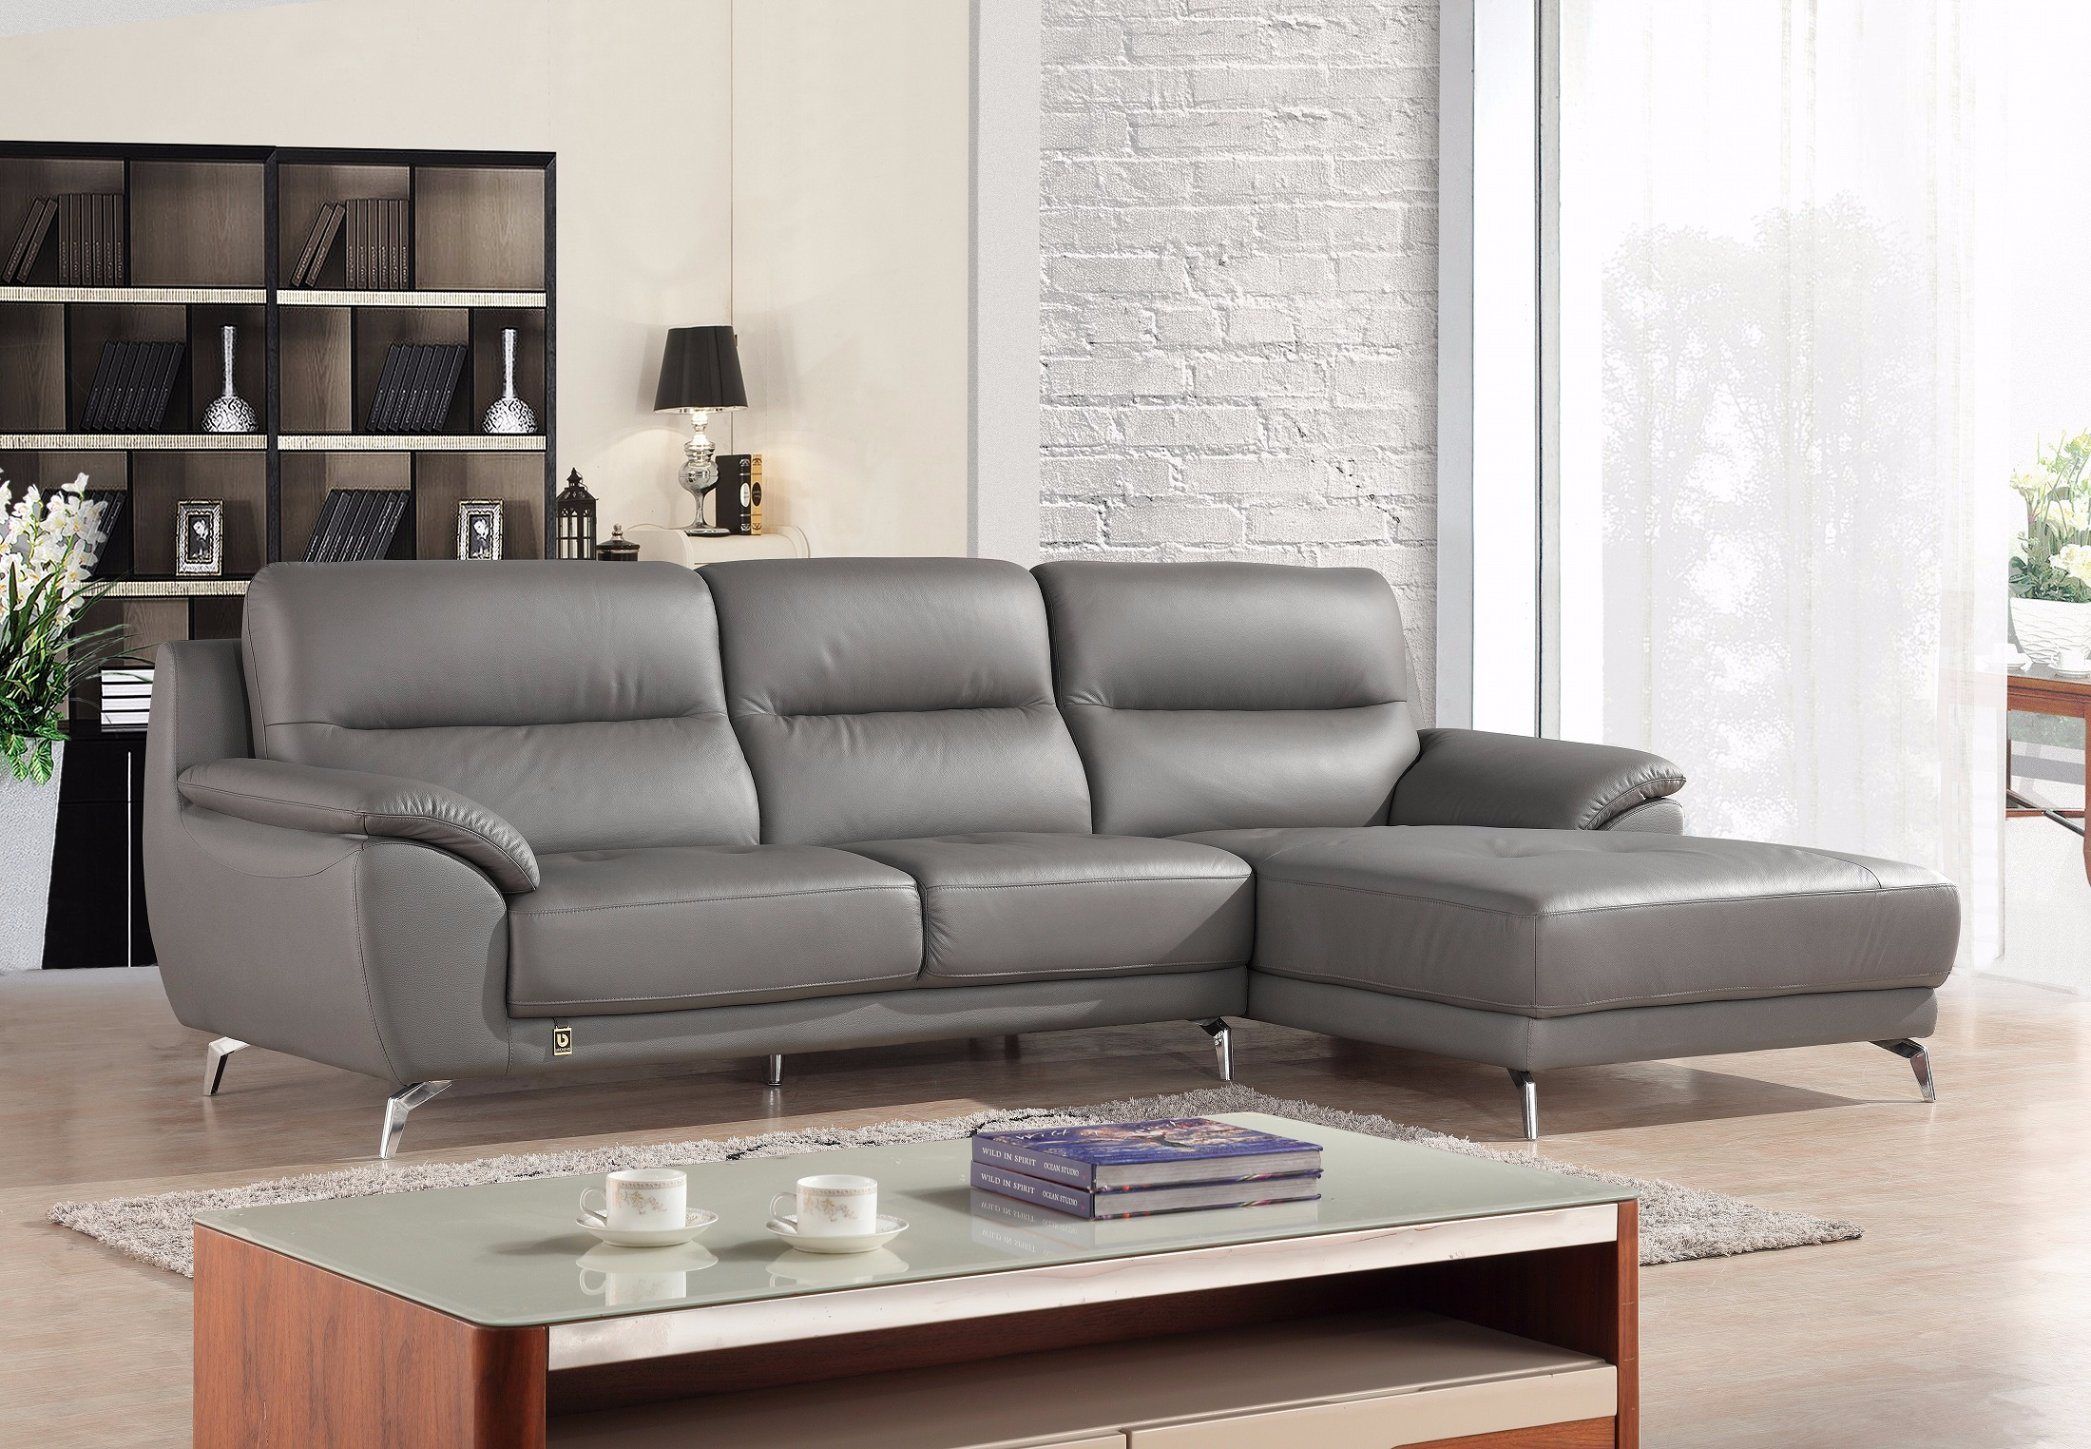 China European Modern Big L Shape Sectional Leather Sofa Pertaining To Owego L Shaped Sectional Sofas (View 2 of 15)